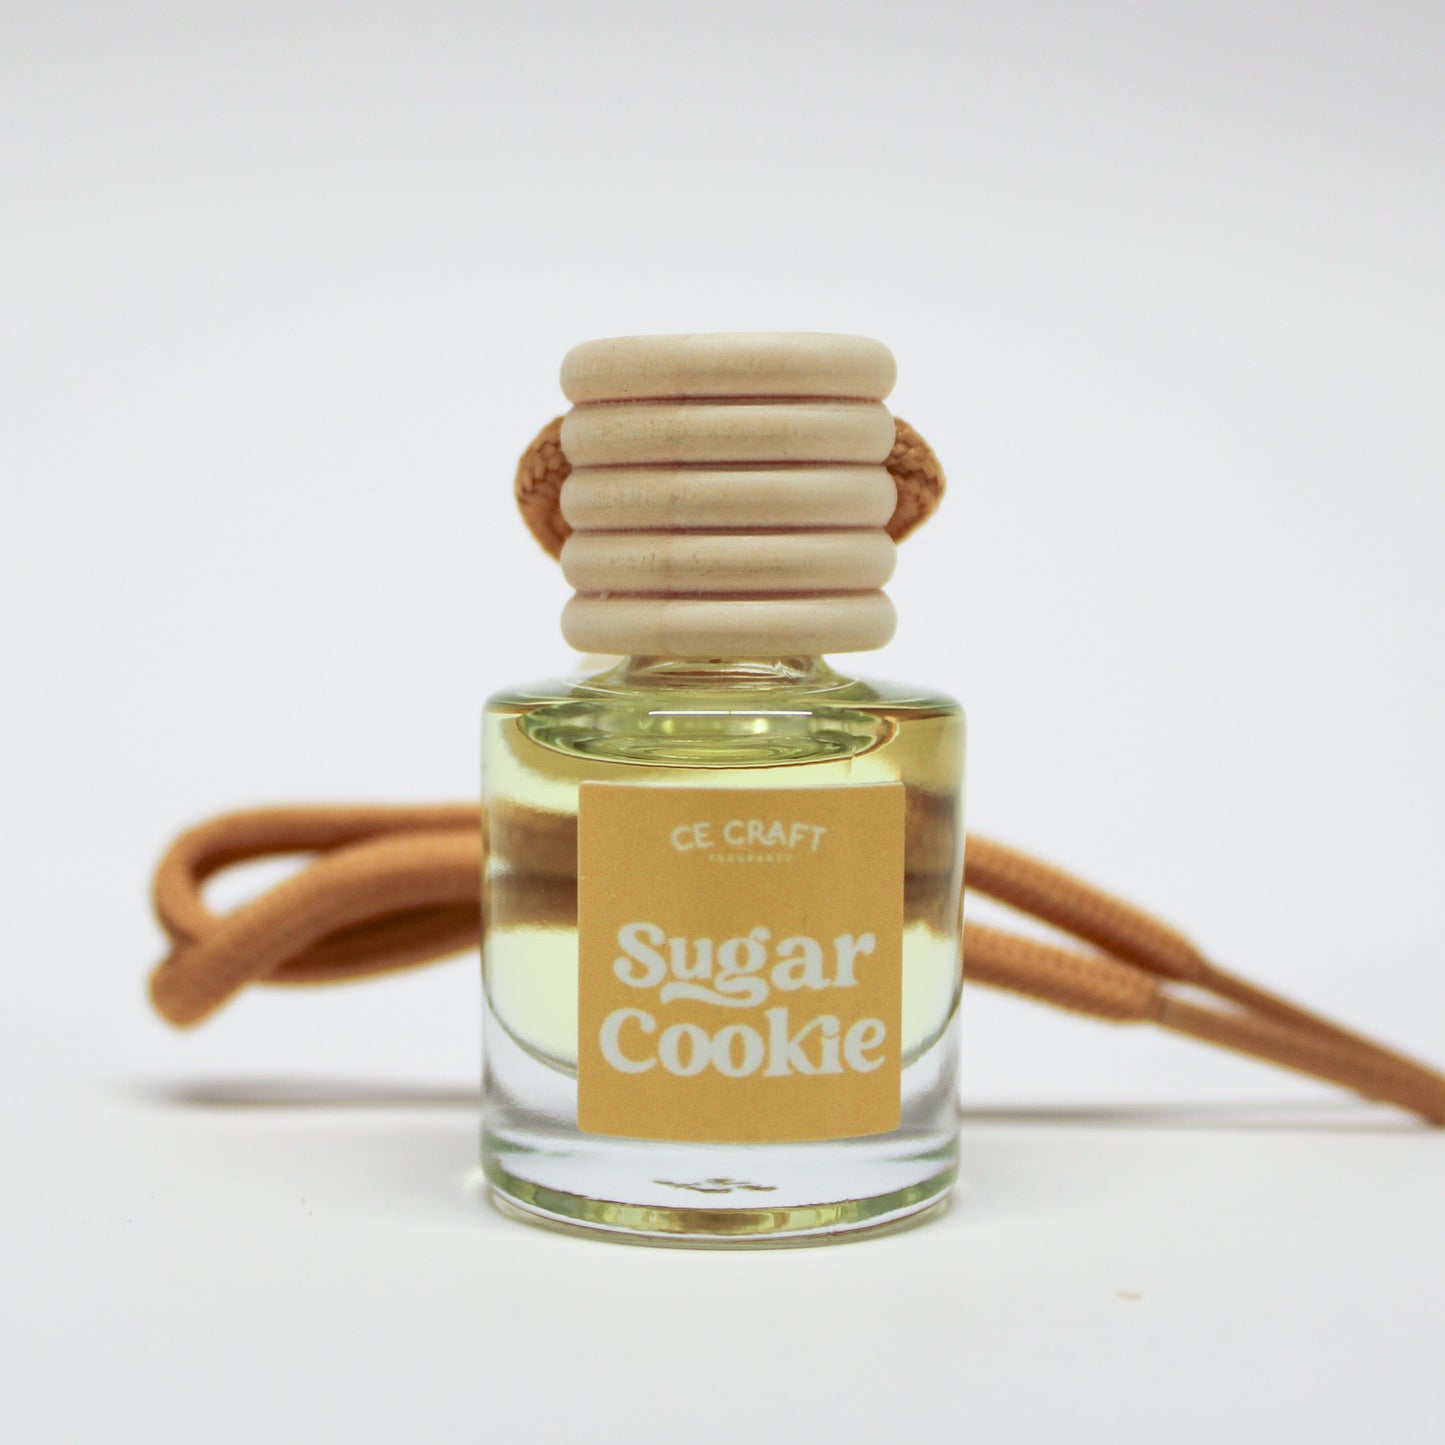 Scented Car Freshener - Car Air Diffuser - Long Lasting Fragrance for Car Vehicle Air Fresheners CE Craft Sugar Cookie 